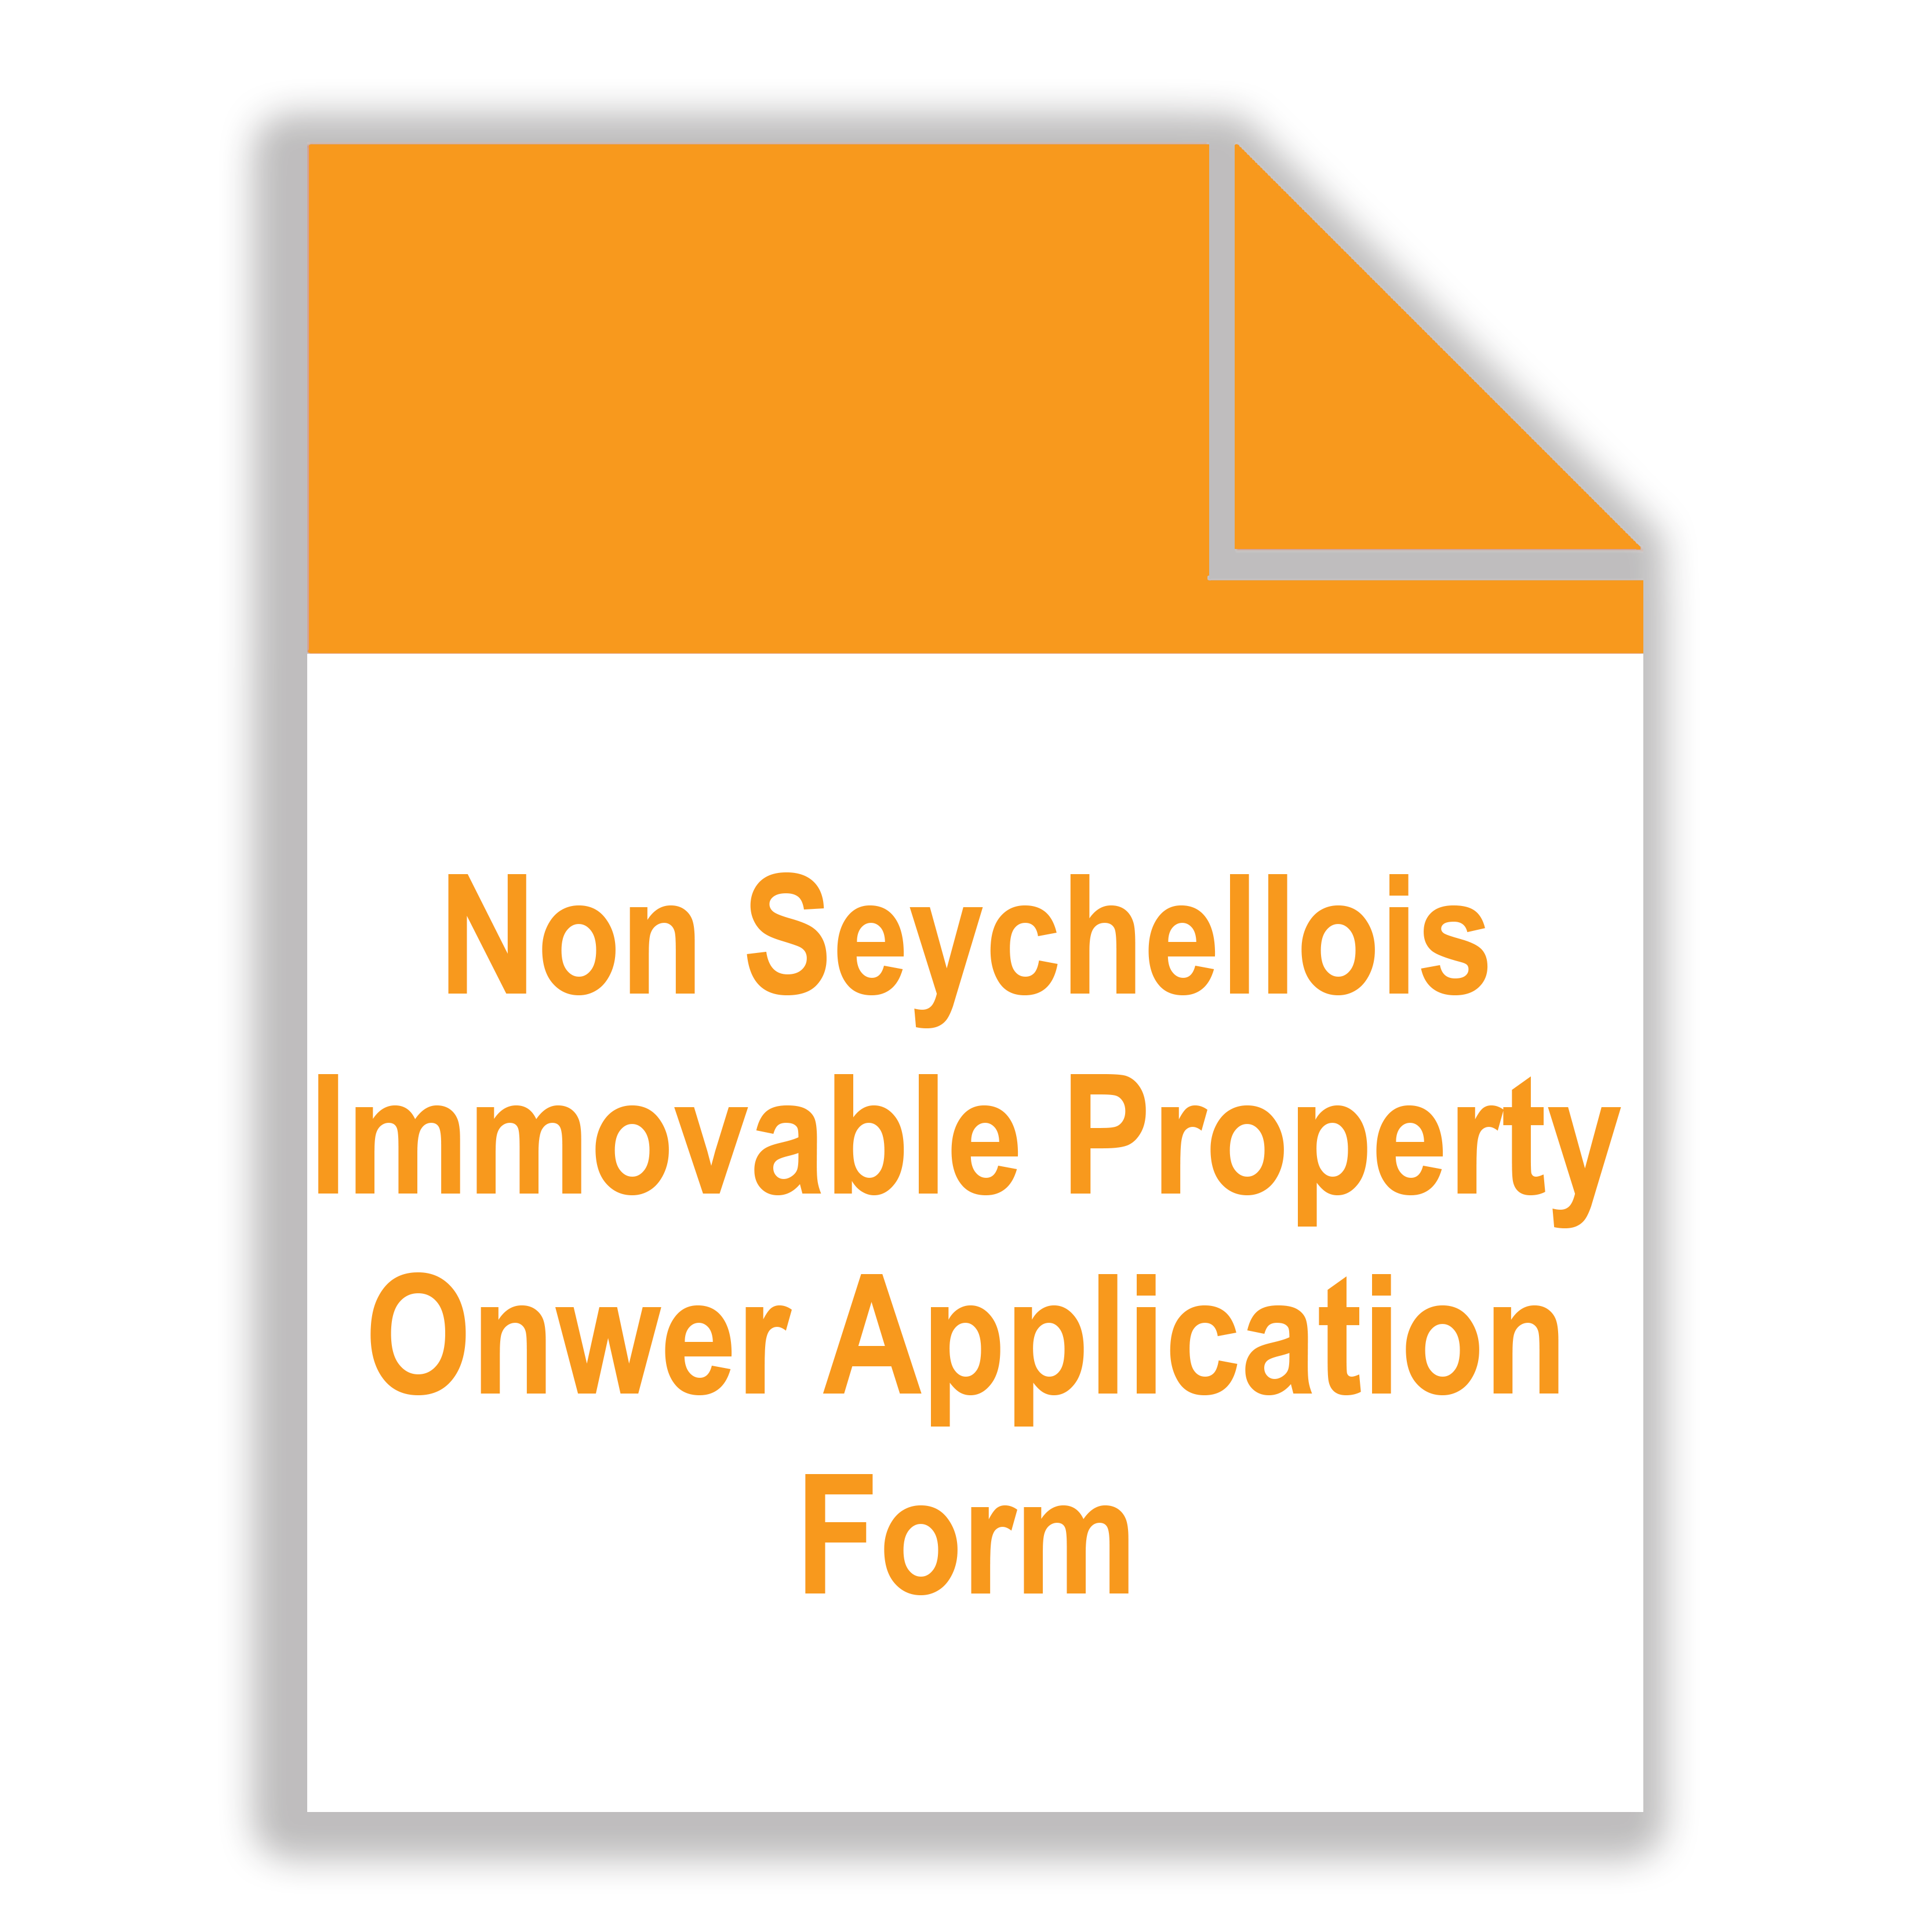 Non_Seychellois_Immovable_Property_Onwer_Application_Form